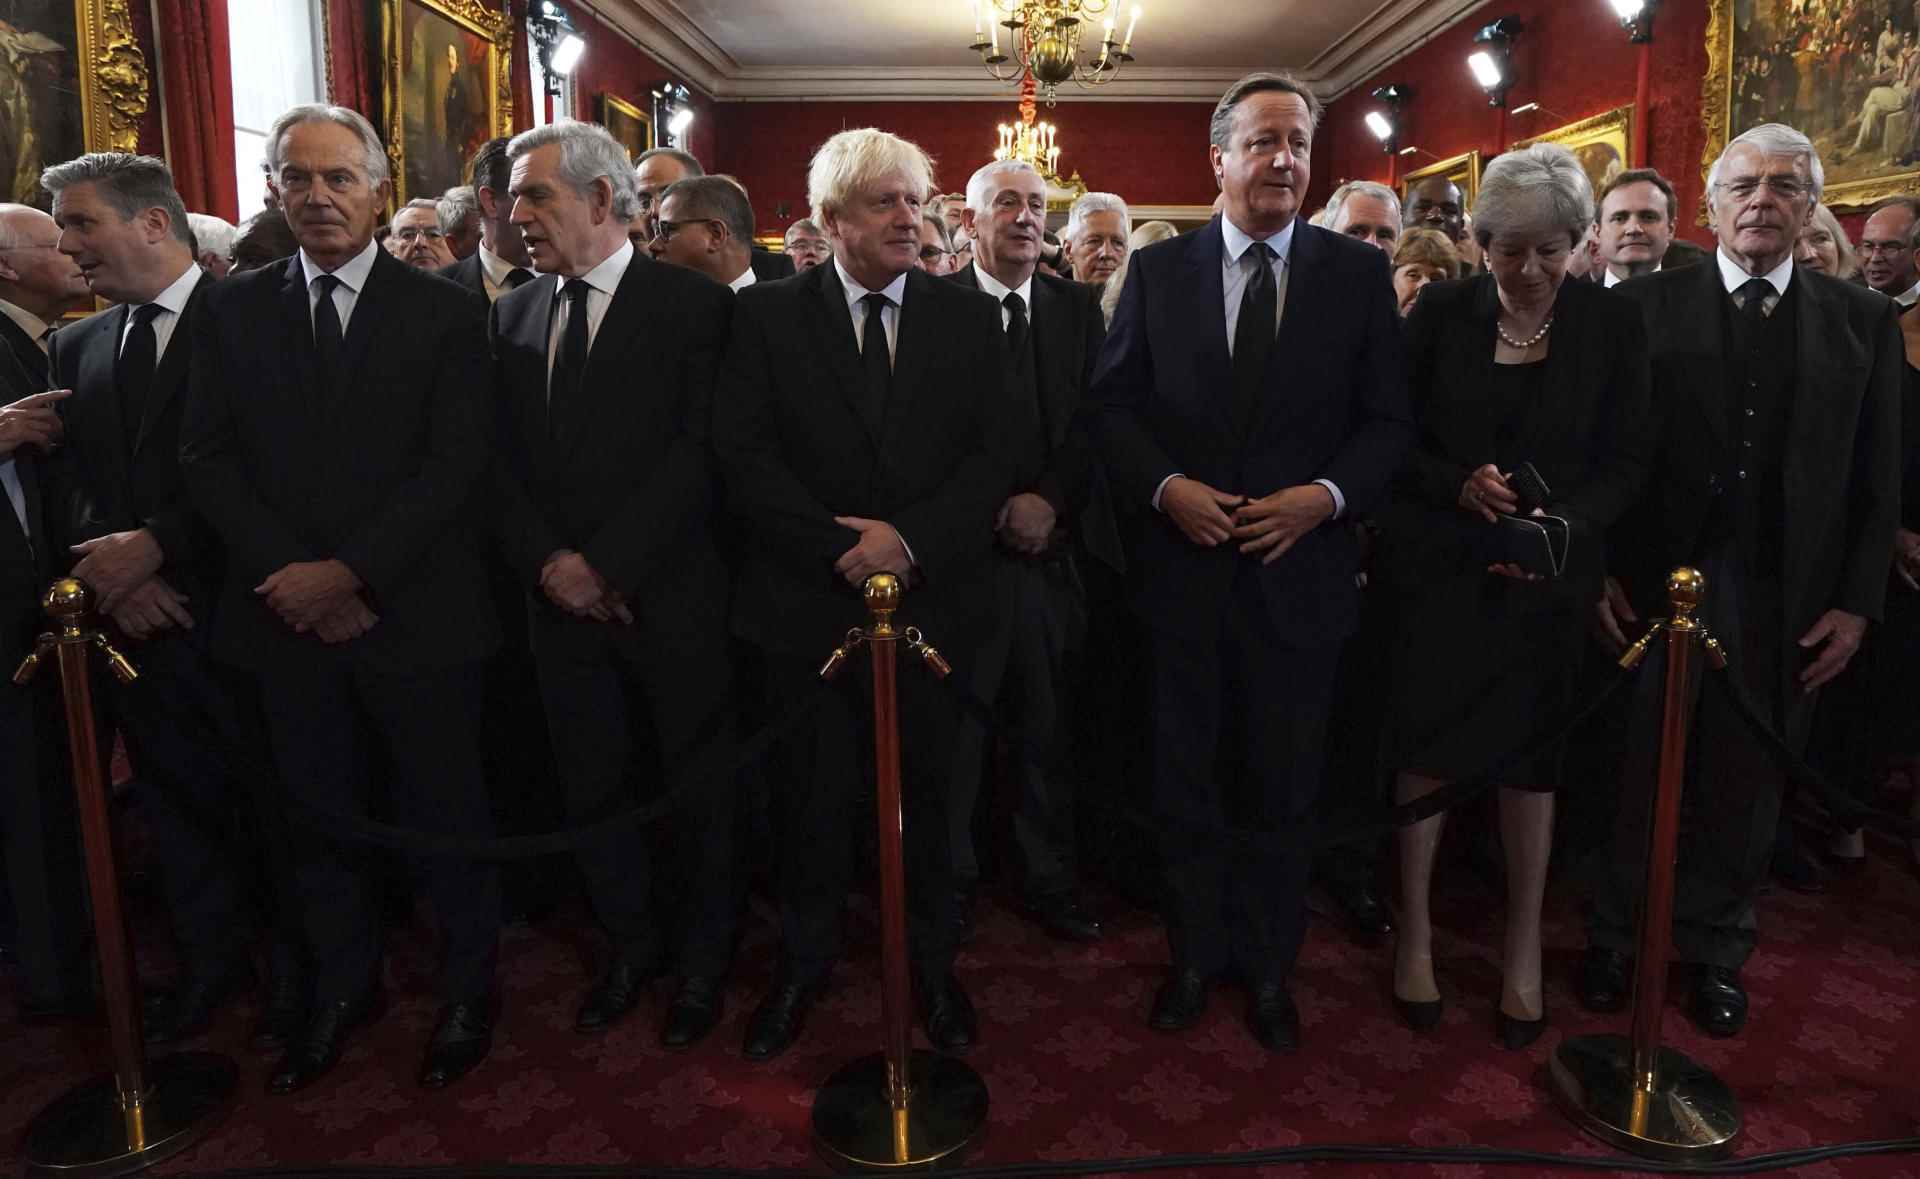 From left, Labor leader Keir Starmer, former prime ministers Tony Blair, Gordon Brown, Boris Johnson, David Cameron, Theresa May and John Major before the Membership Council ceremony at St. James's Palace , in London, Saturday September 10, 2022. House of Commons 'speaker' Lindsay Hoyle stands in the second row.